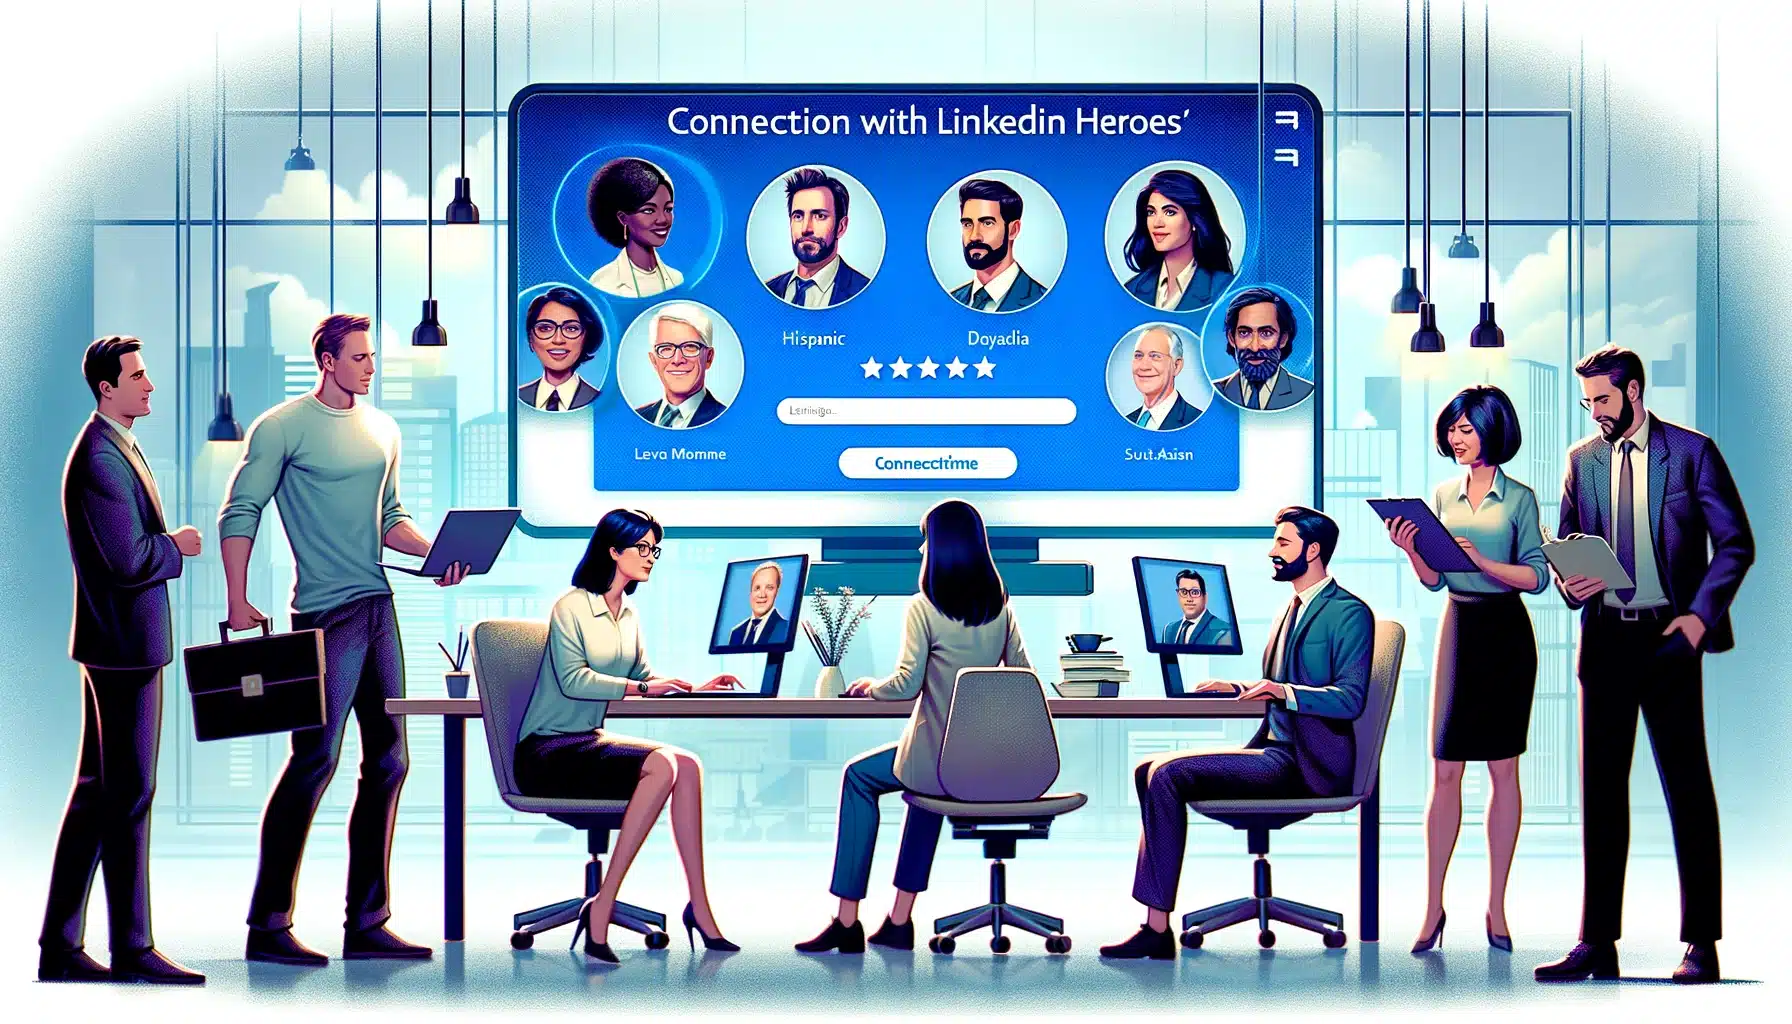 Connection With LinkedIn Heroes